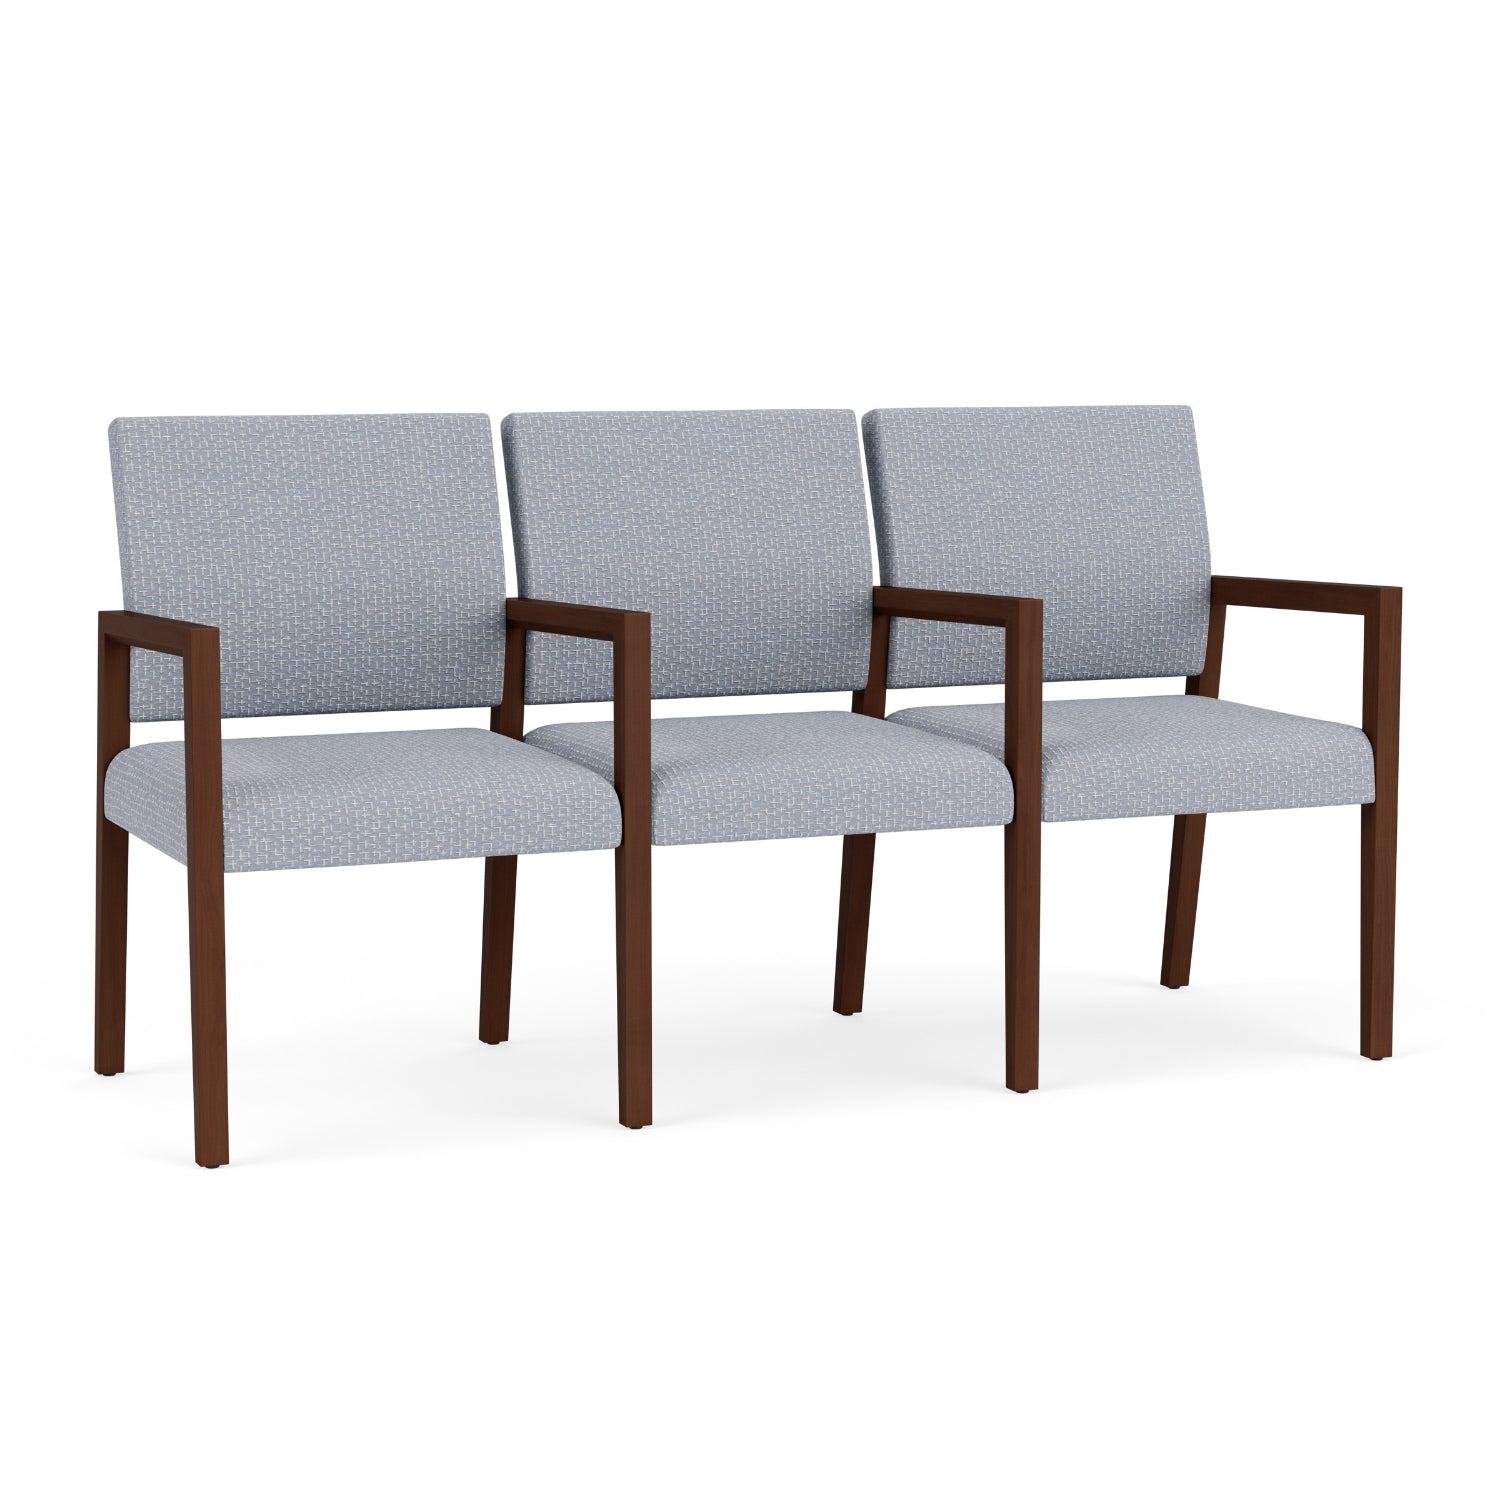 Brooklyn Collection Reception Seating, 3 Seats with Center Arms, Designer Fabric Upholstery, FREE SHIPPING